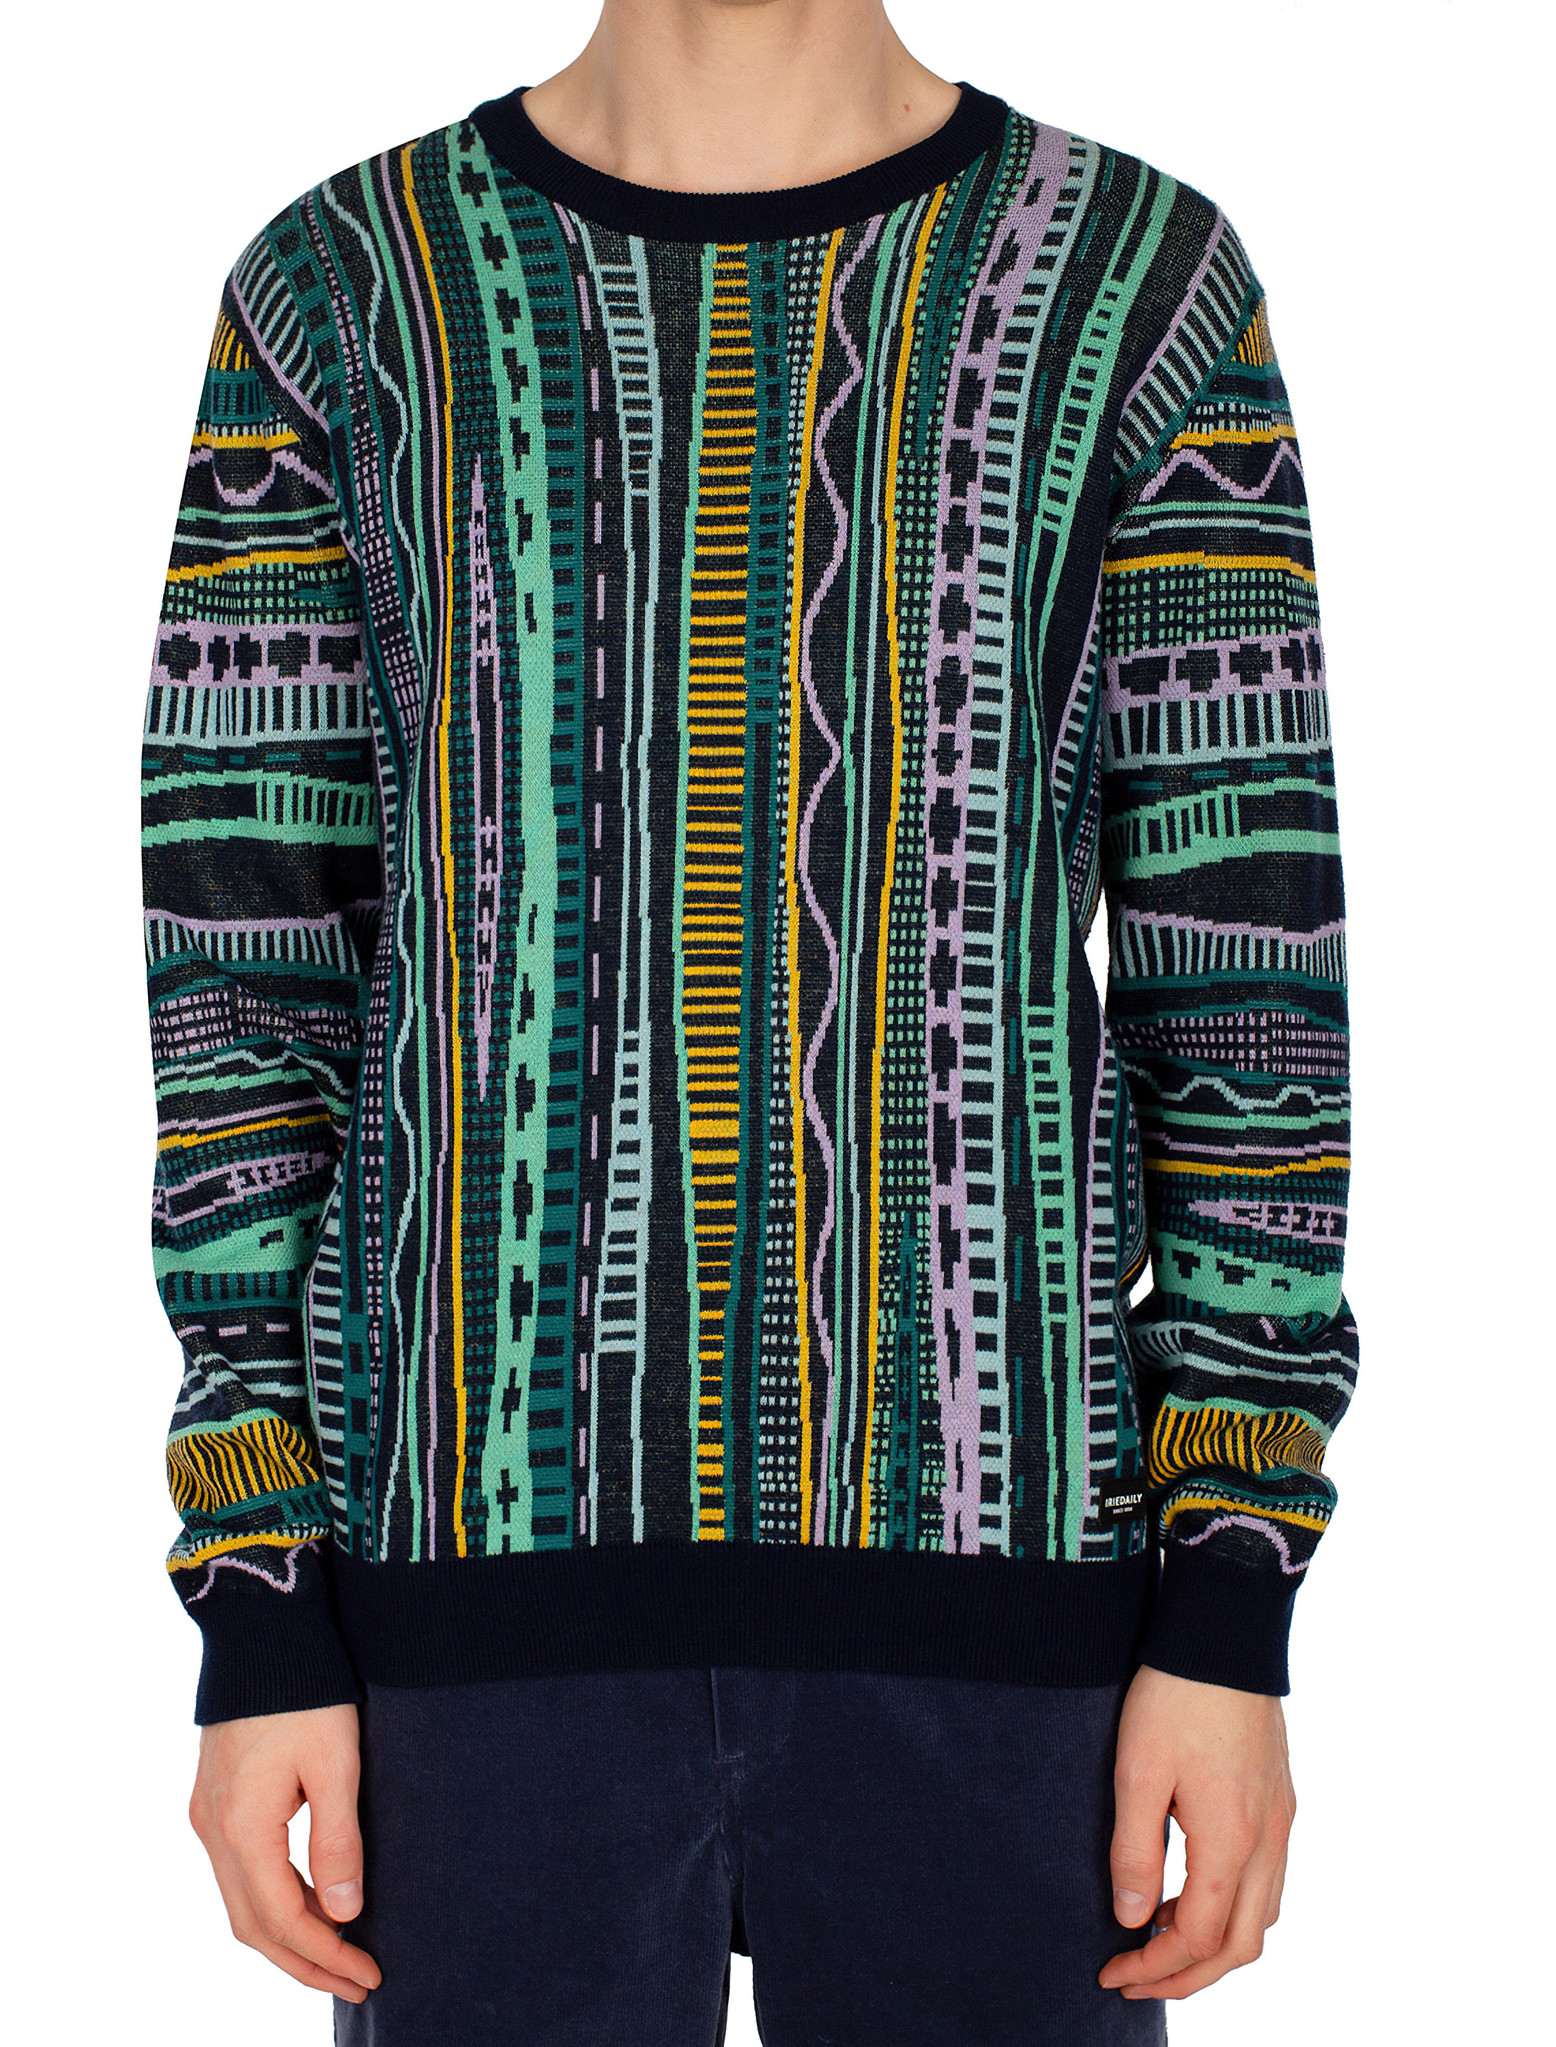 ♣ Theodore Snazzy Summertime Hippie Knit-2